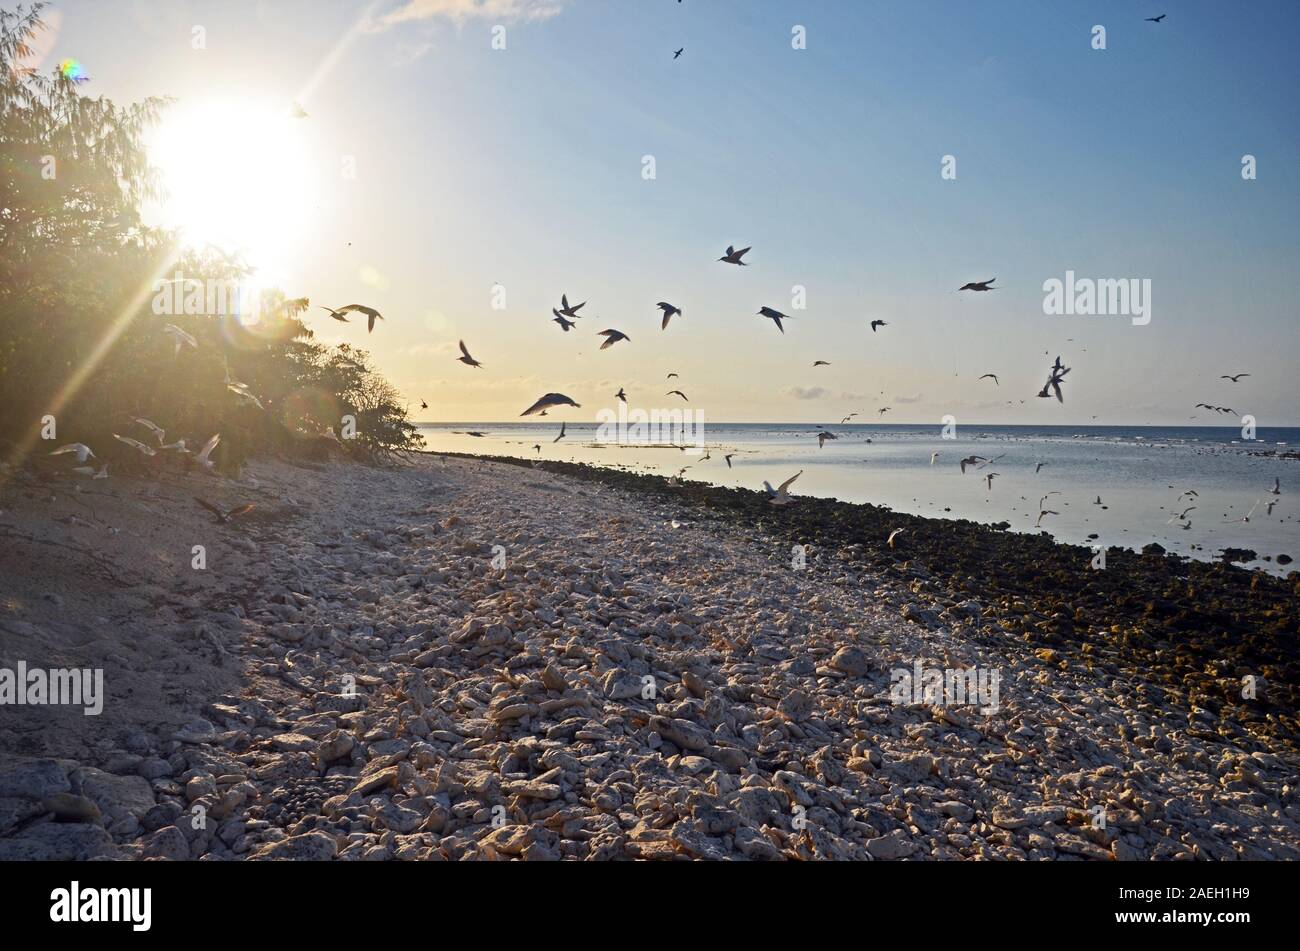 Terns fly over the coral-rubble beach on Lady Elliot Island, Queensland, Australia, as the sun sets Stock Photo